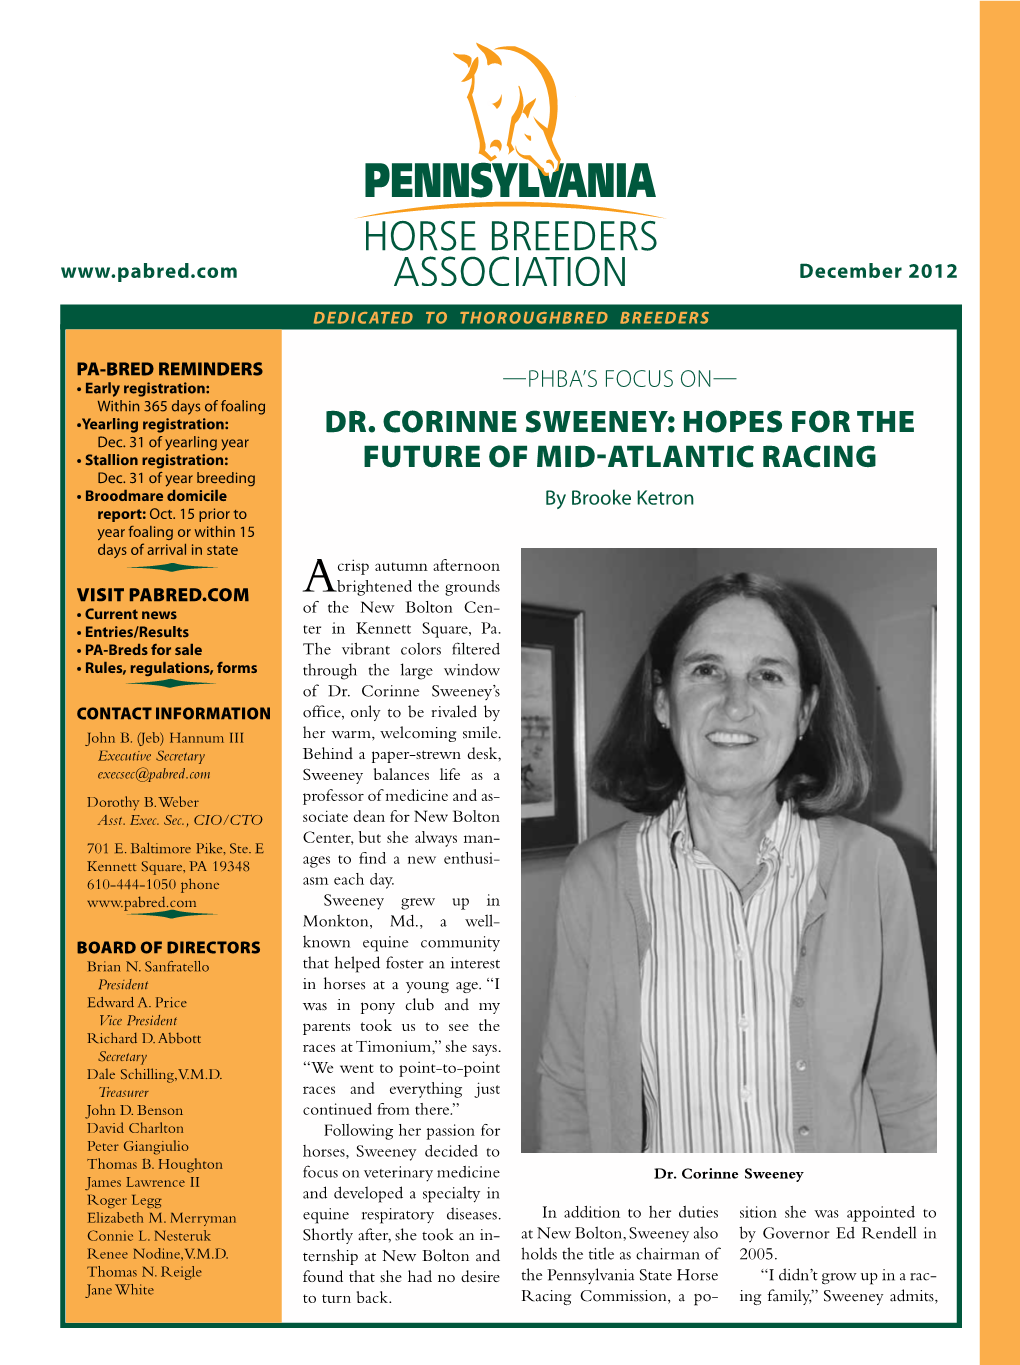 Dr. Corinne Sweeney: Hopes for the Dec